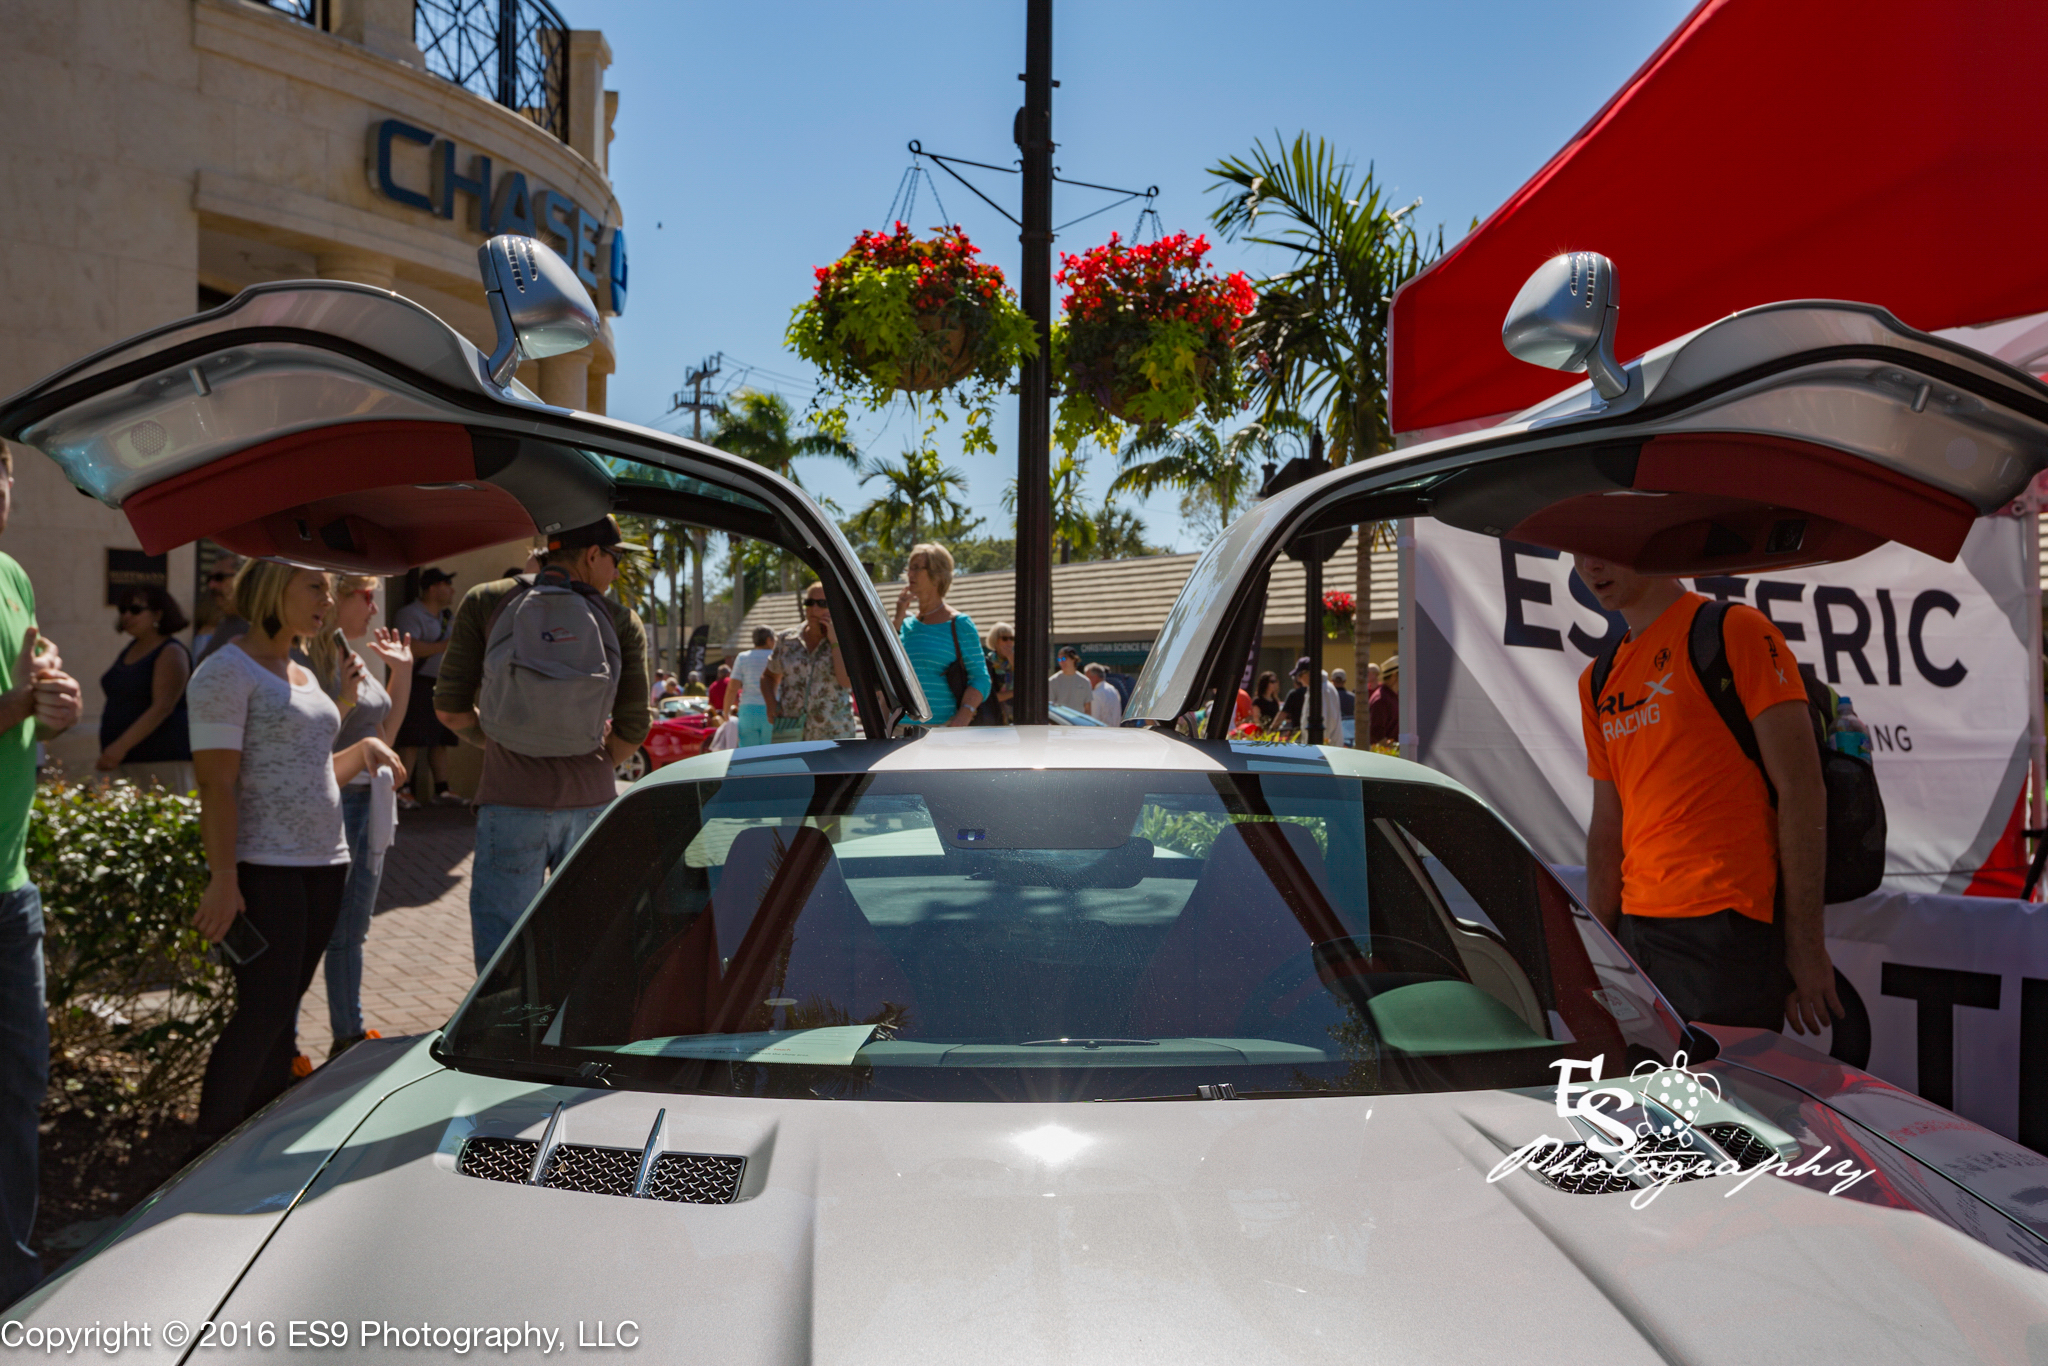 Cars on 5th Mercedes-Benz SLS AMG Wing Doors @ ES9 Photography 2016 Naples Photographer.jpg